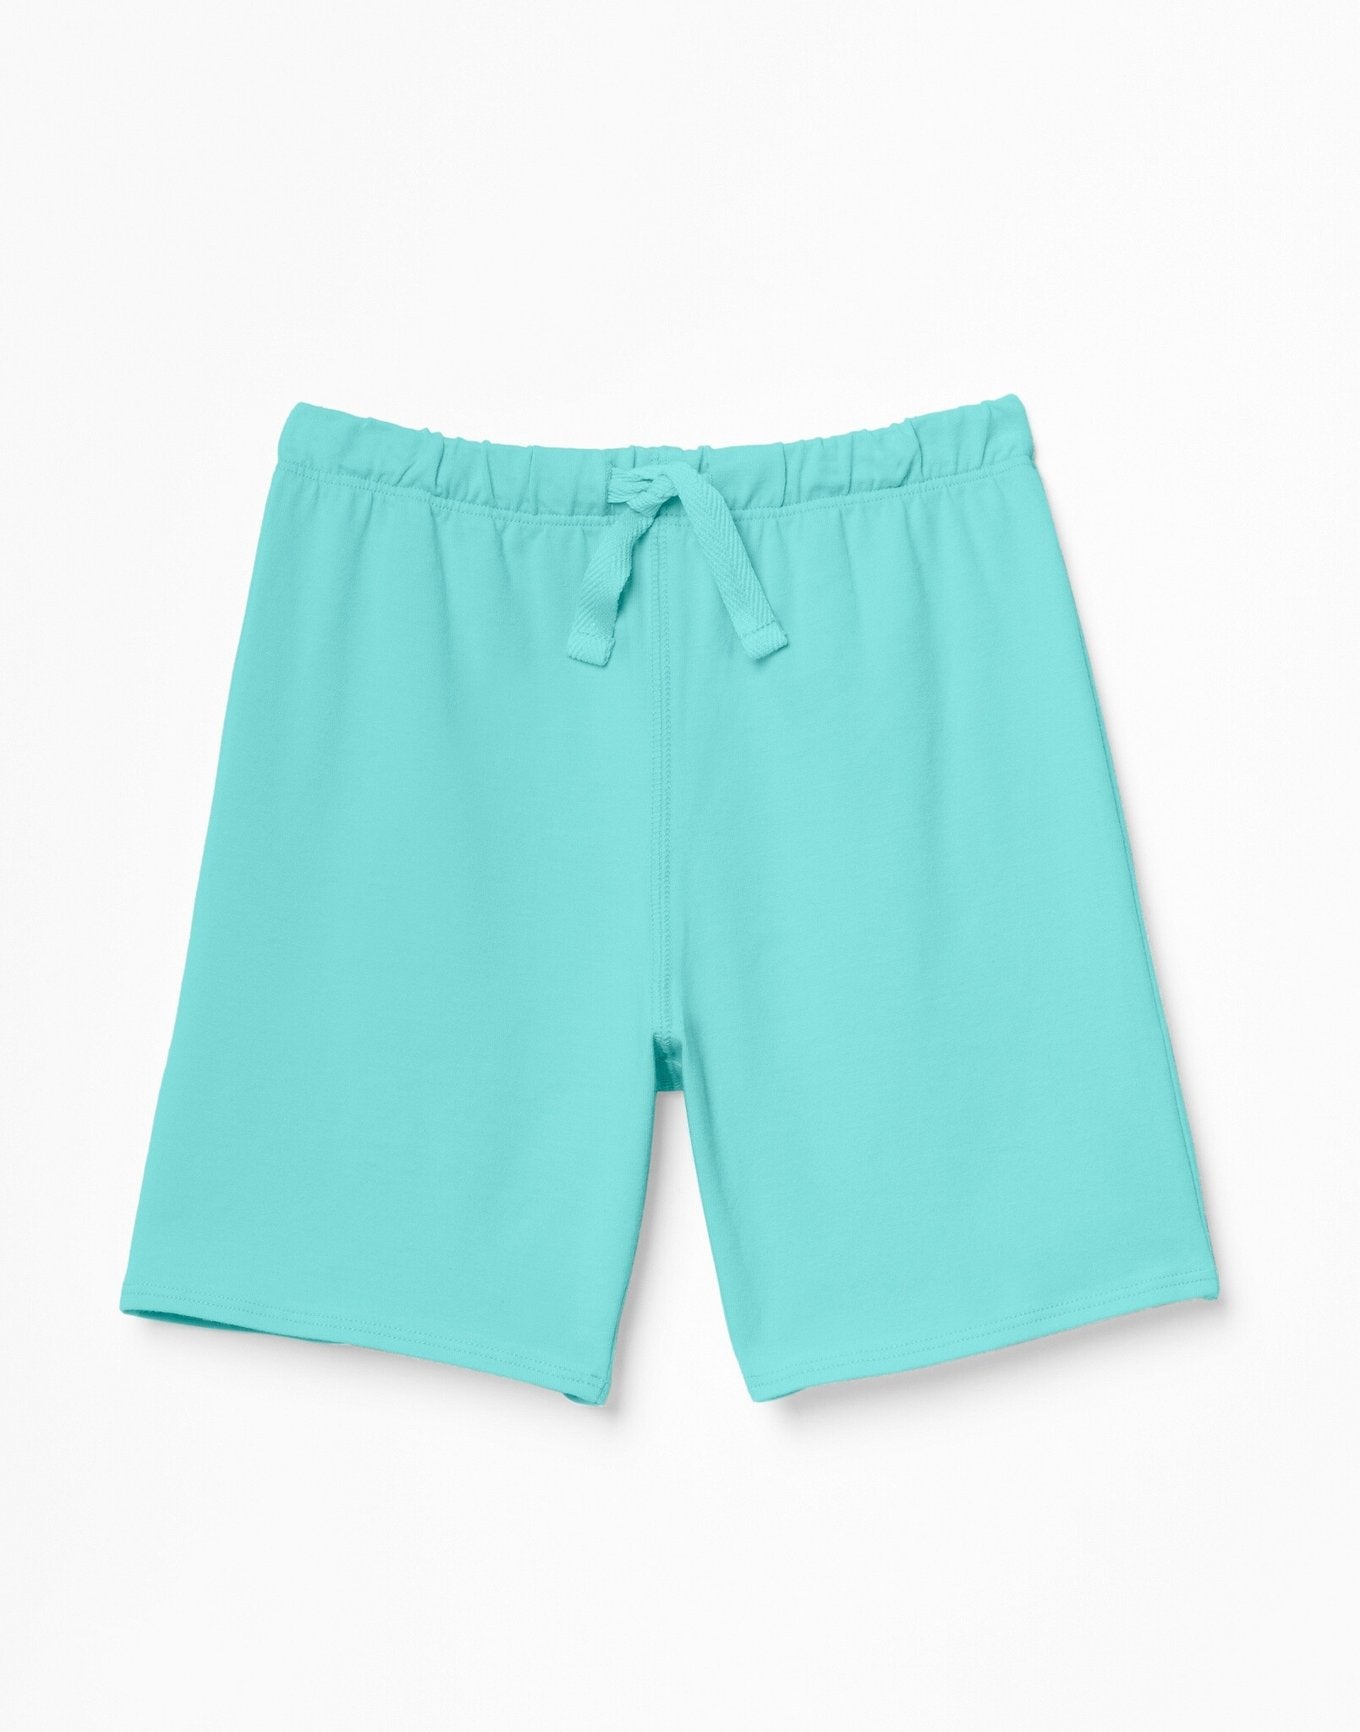 Outlines Kids Nolan in color Blue Tint and shape shorts